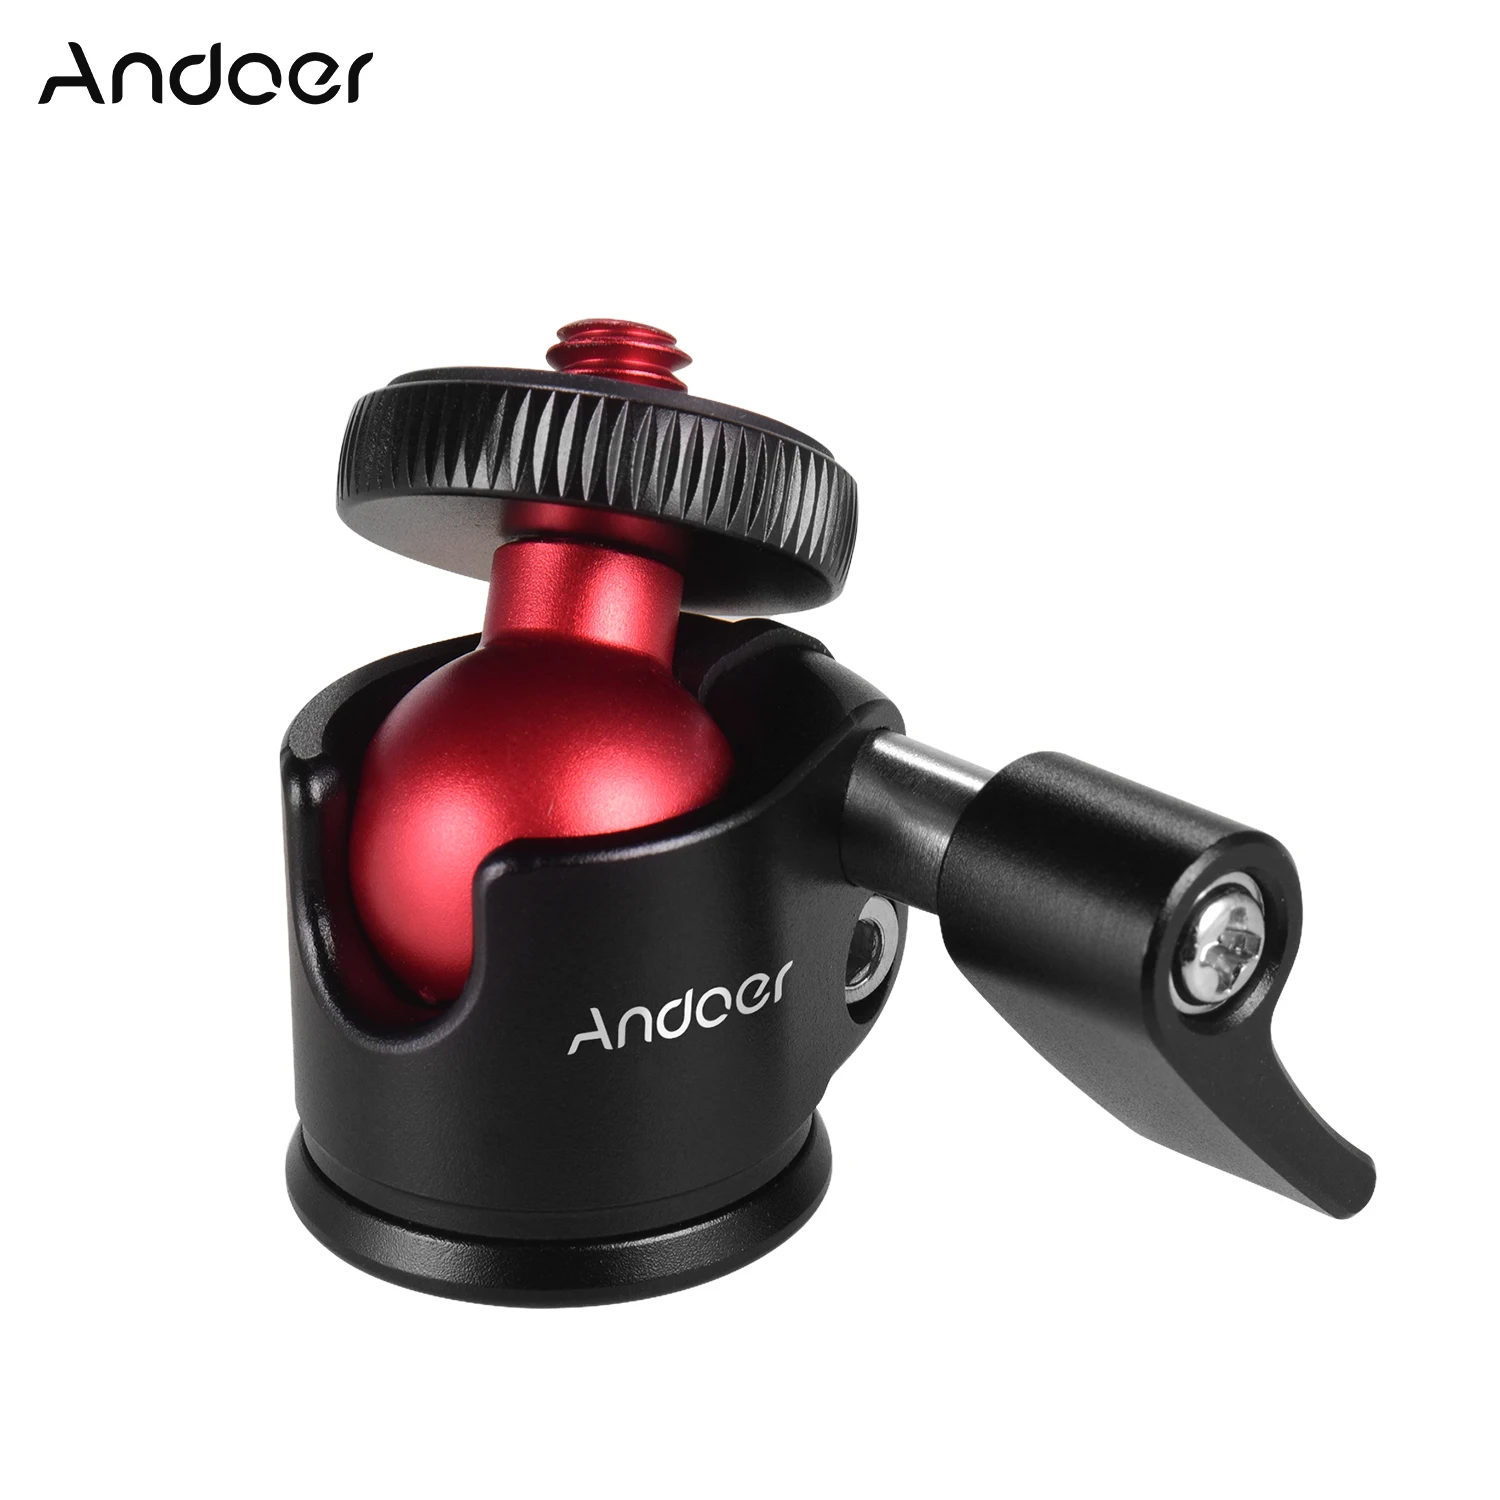 

Andoer Mini Tripod Ball Head 360 Degree Swivel for DSLR Camera with 1/4in Screw great compatible with tripod, selfie stick